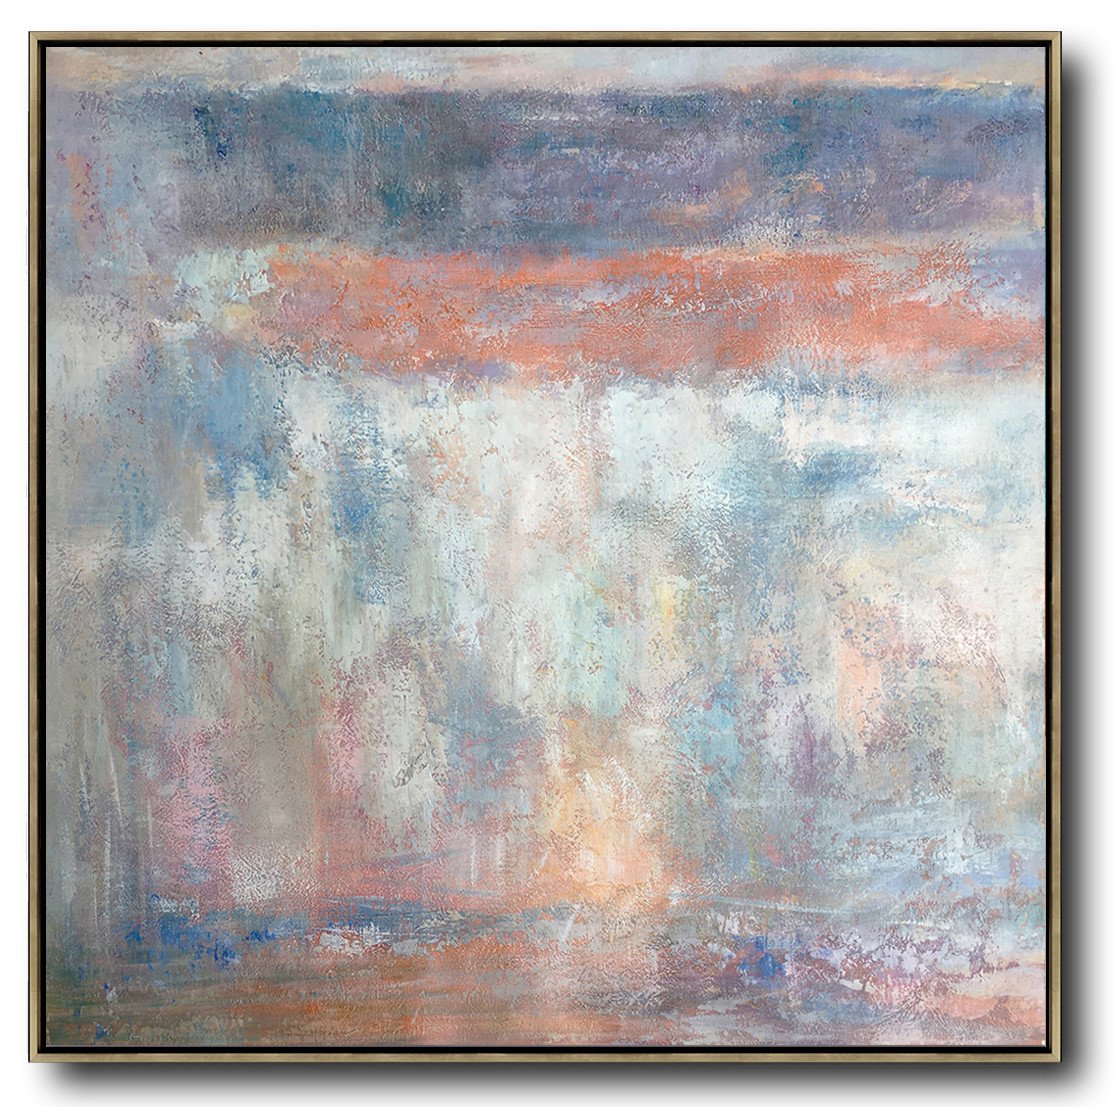 Large Abstract Painting On Canvas,Oversized Contemporary Art,Abstract Painting For Home,Orange,Grey,White,Blue.etc